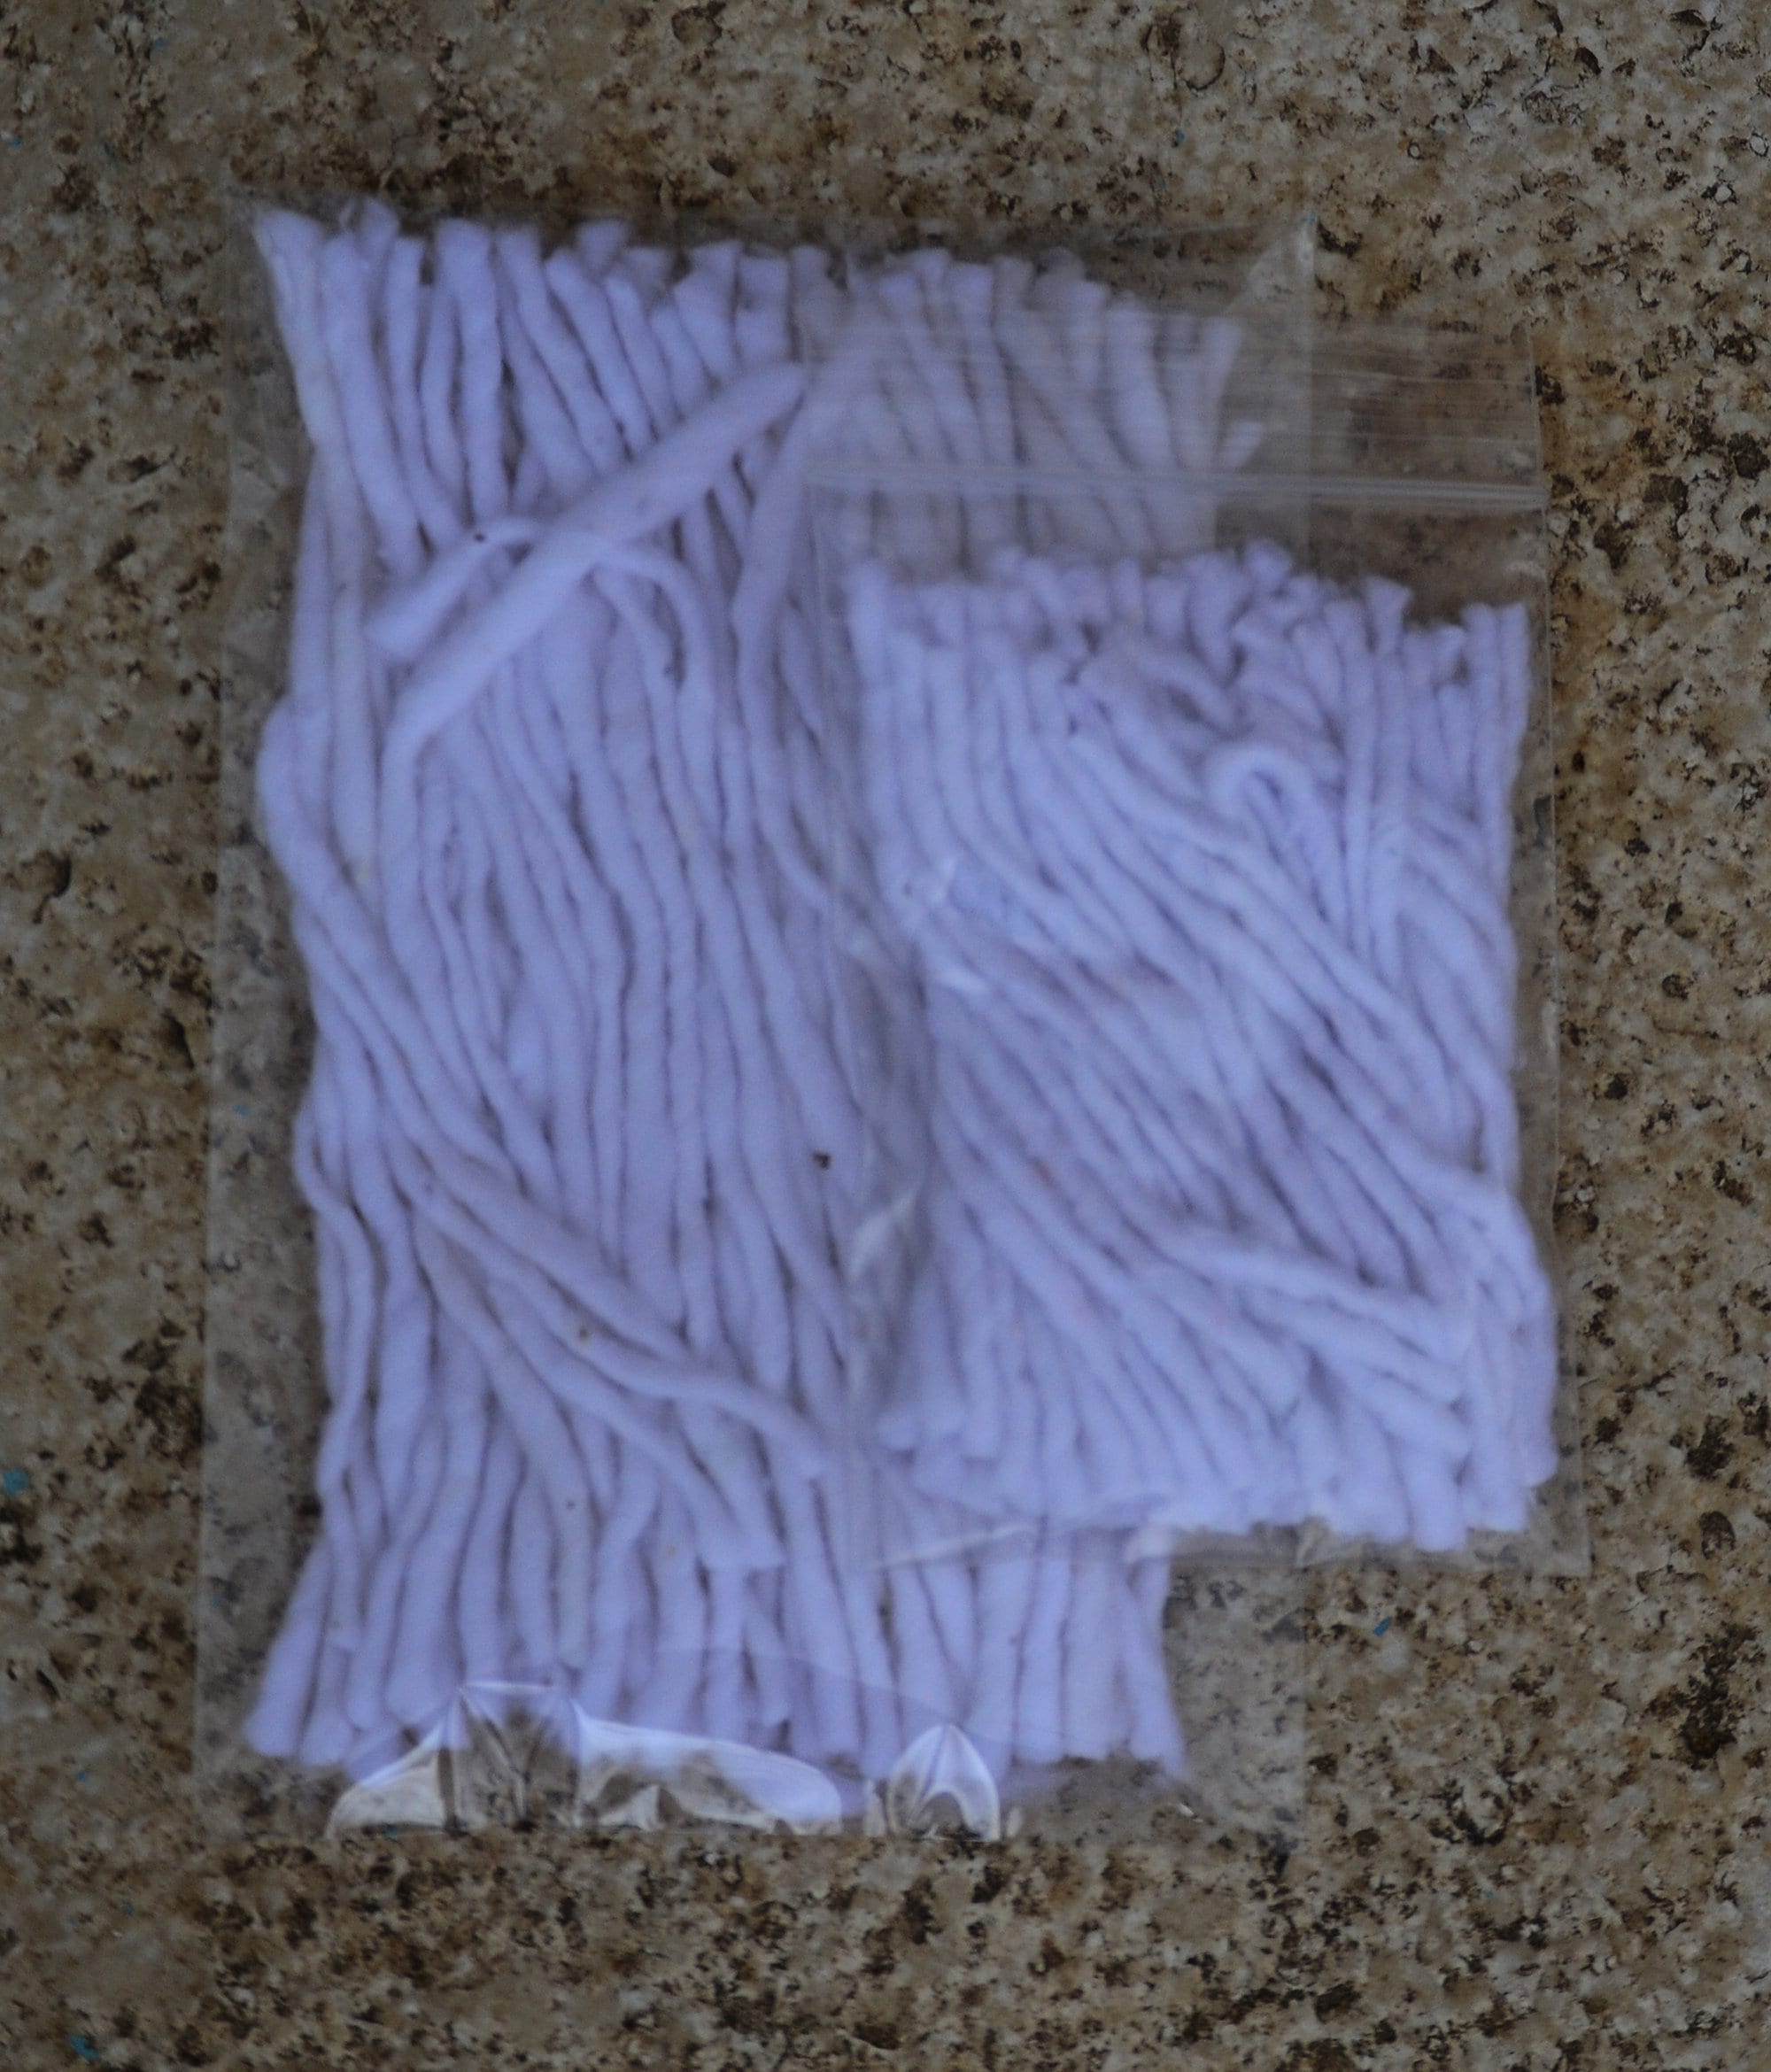 100 Xlong Cotton Wicks for Candle Making, 6/15cm Long Organic Cotton Wicks for DIY Projects, Ideal for Kerosene Oil Lamp, Diya Candle Making, Cotton